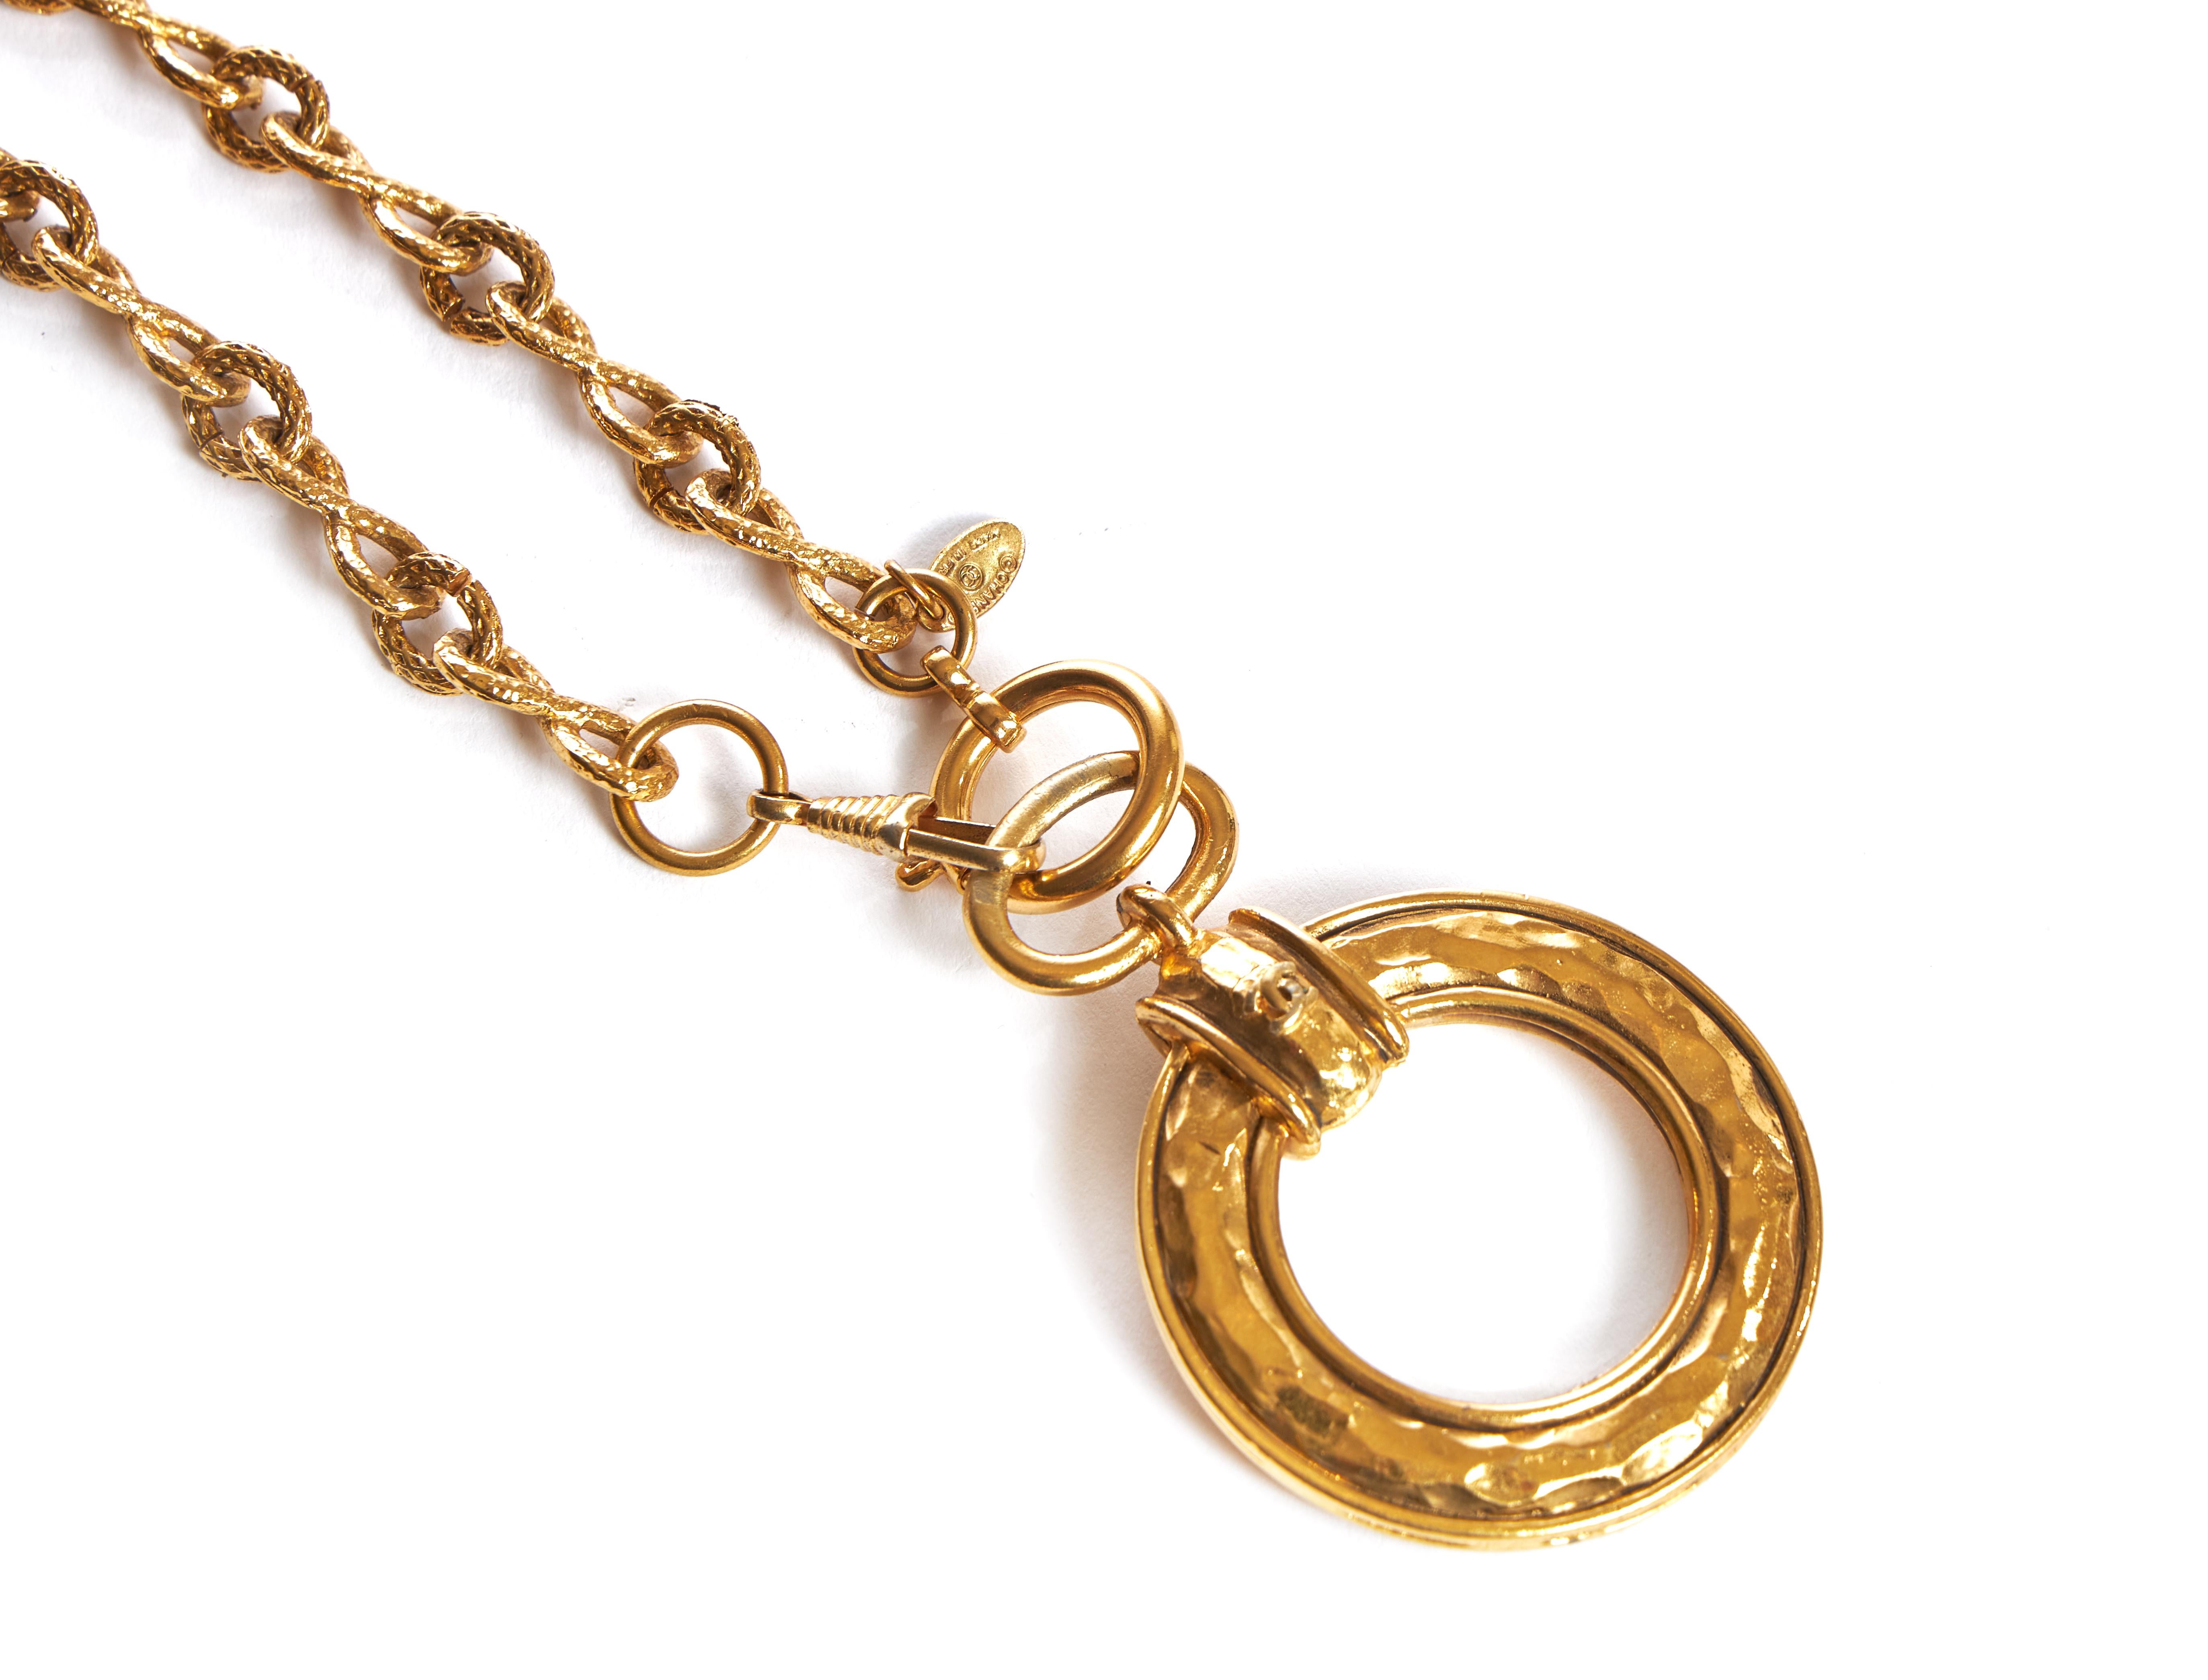 Women's 1980s Vintage Chanel Hammered Magnifier Necklace For Sale